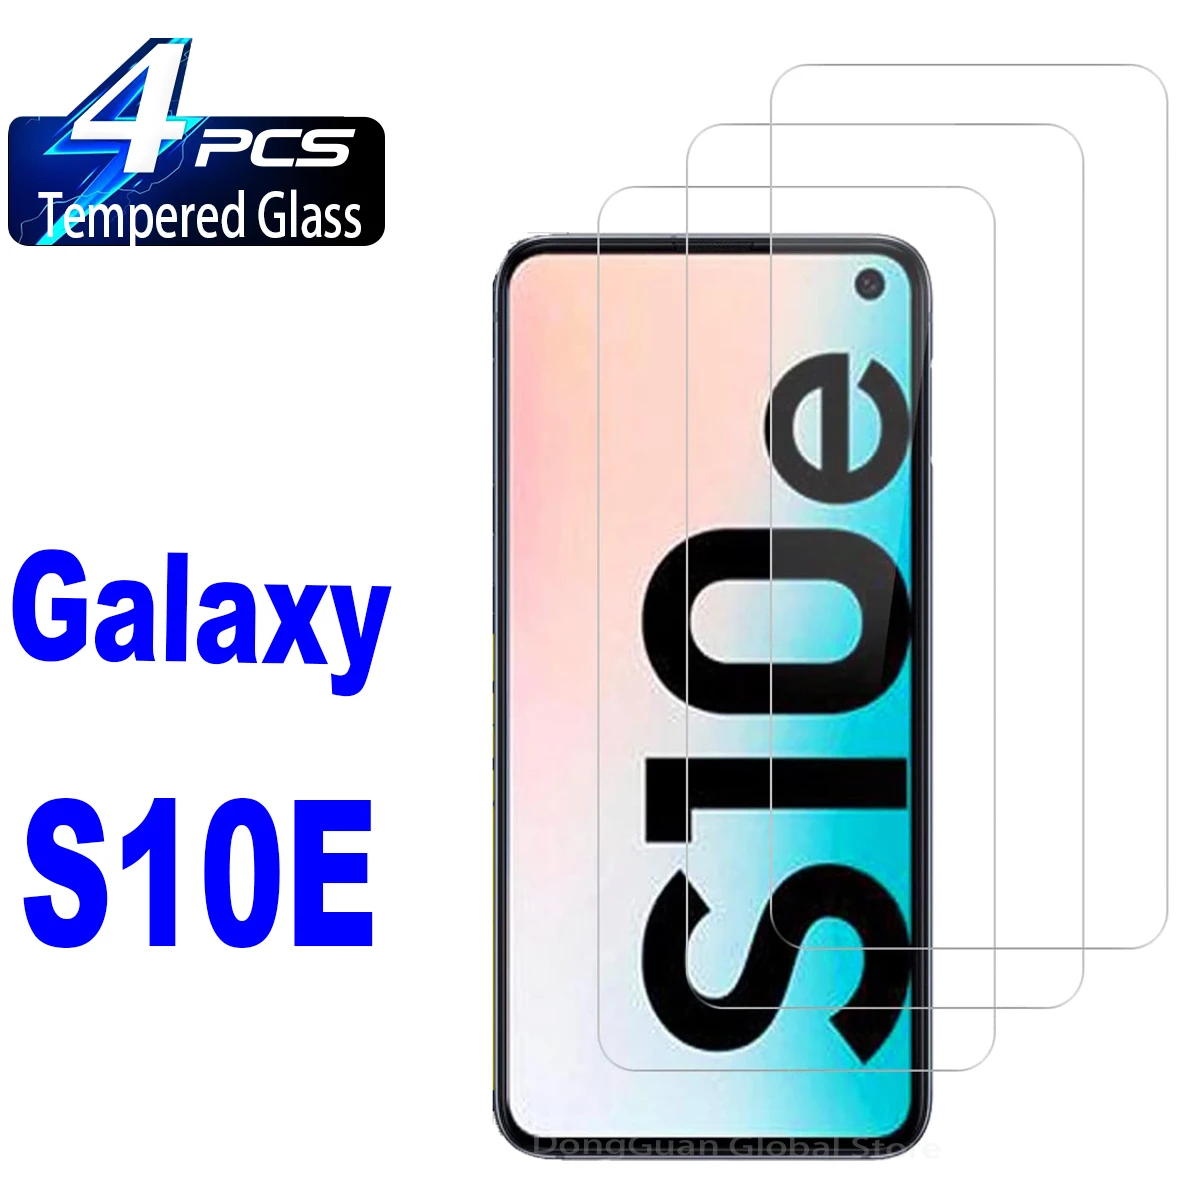 2-4pcs-high-auminum-tempered-glass-for-samsung-galaxy-s10e-screen-protector-glass-film